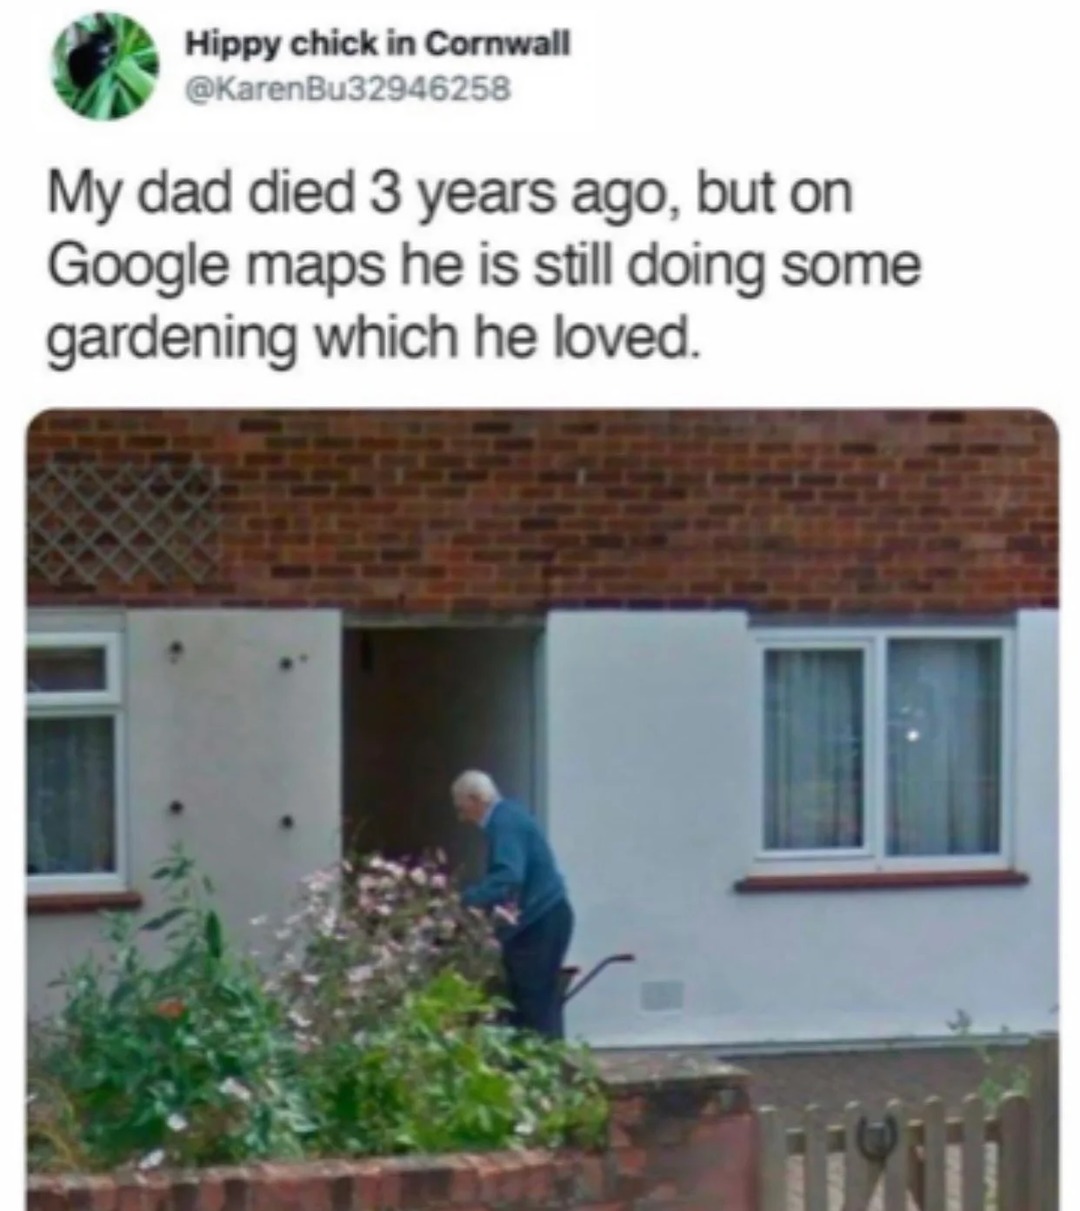 His dad is still alive to Google street - meme